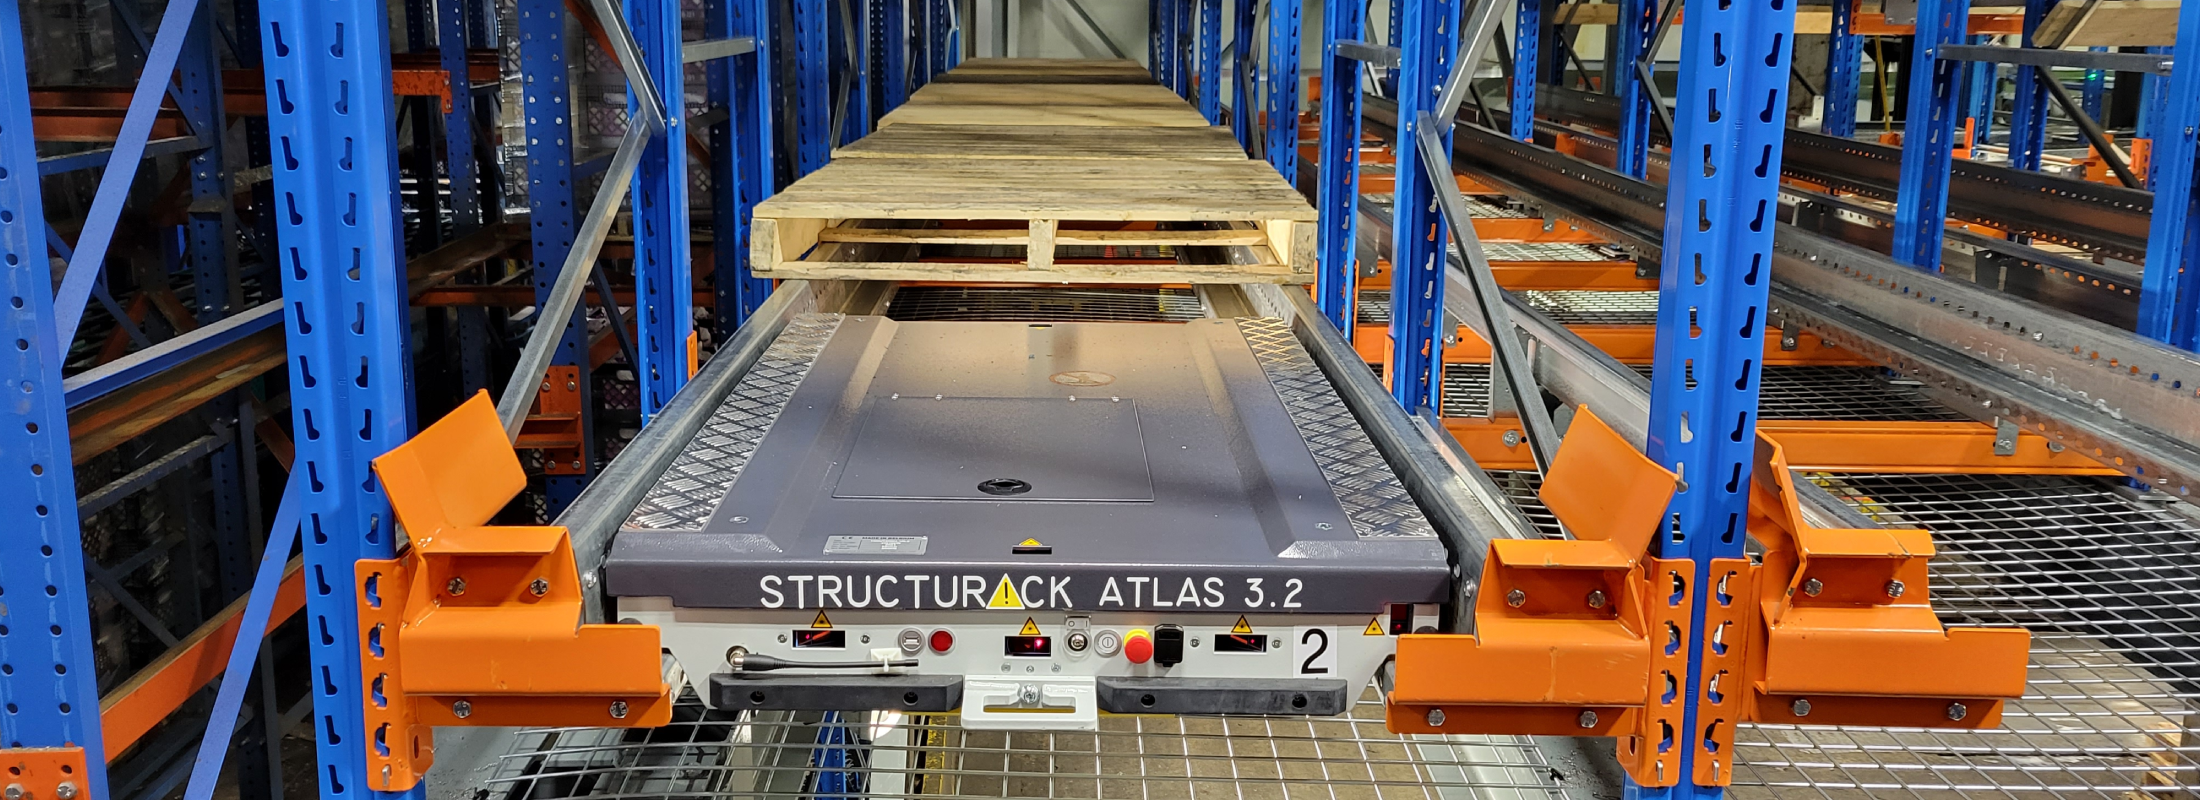 The New Structurack Atlas Shuttle is now available